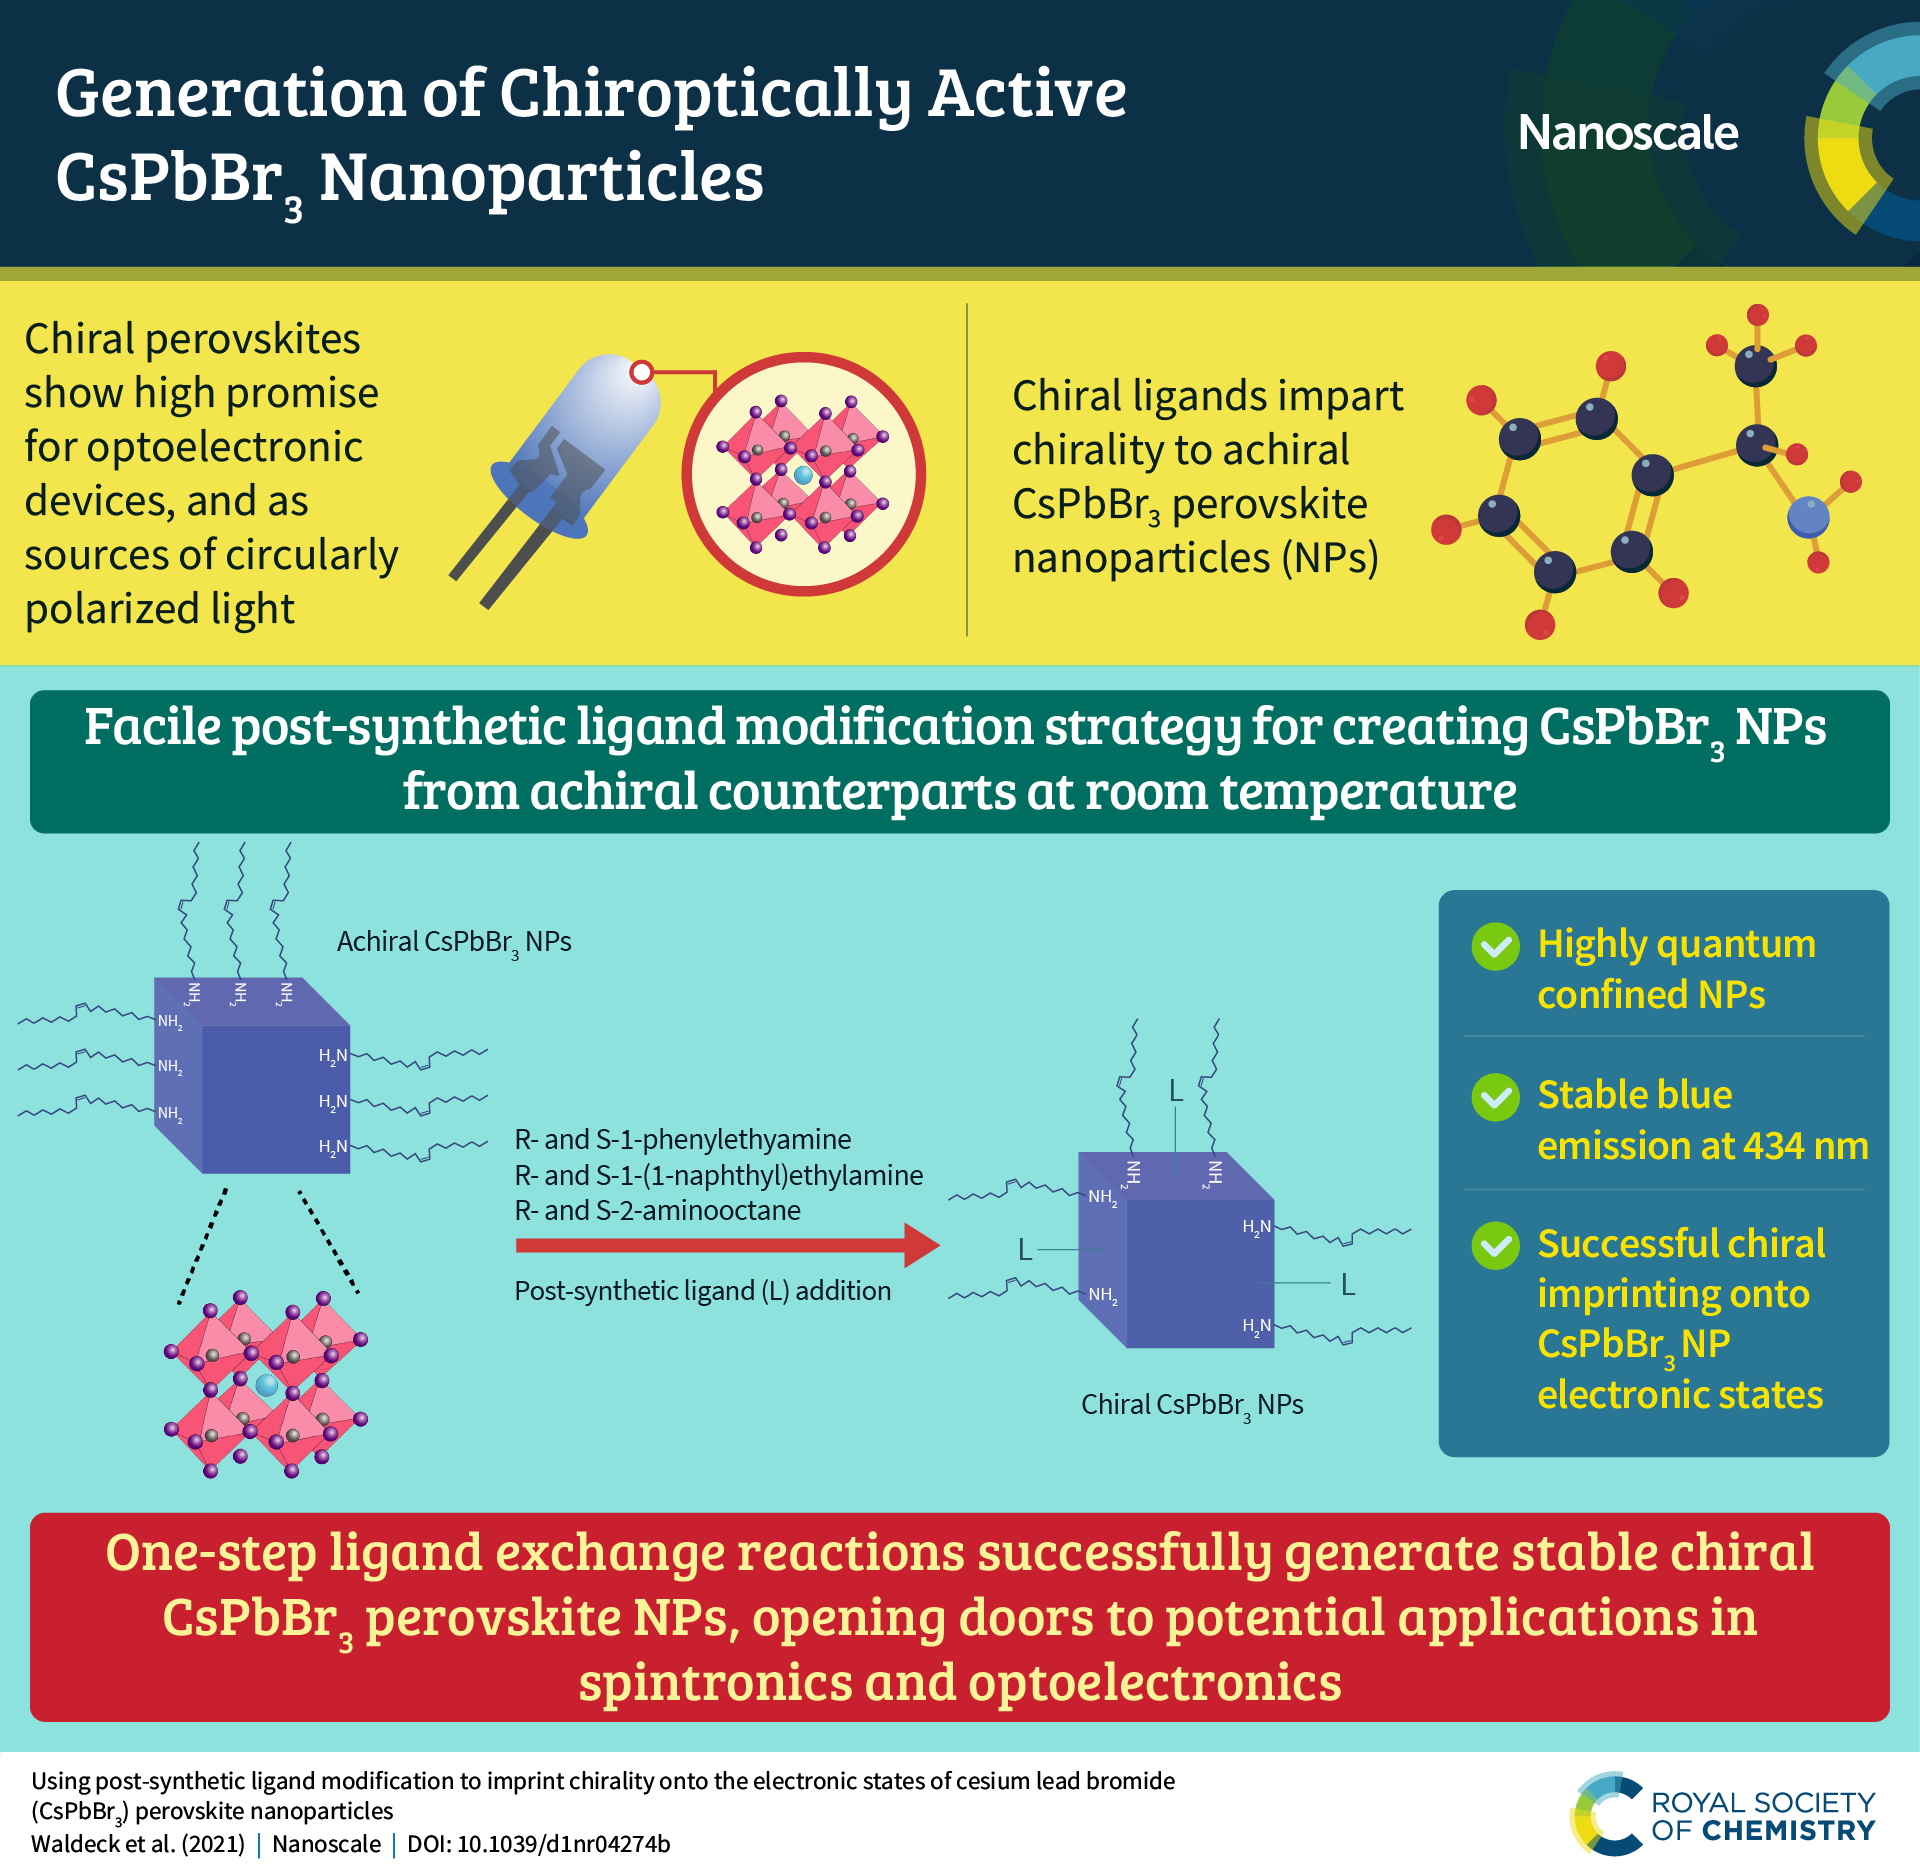 An infographic summarising the content of the article “Using post-synthetic ligand modification to imprint chirality onto the electronic states of cesium lead bromide (CsPbBr3) perovskite nanoparticles"